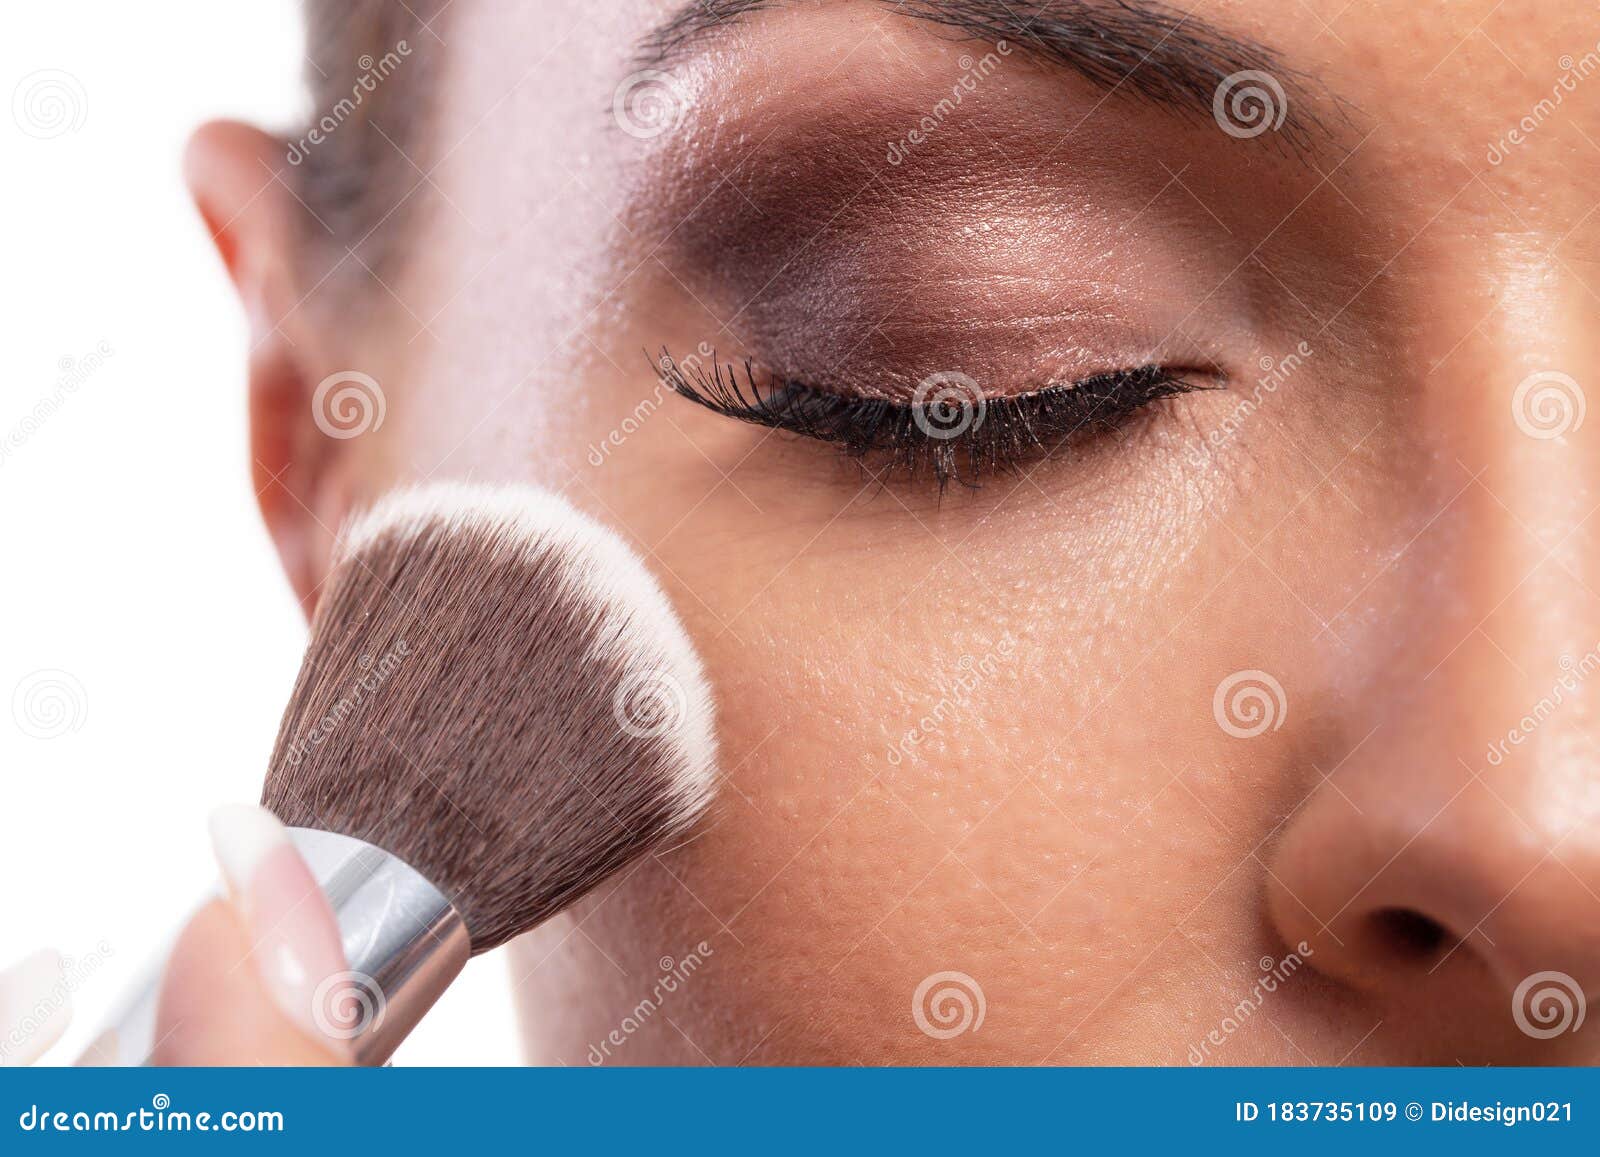 applying makeup on a face of a beautiful woman